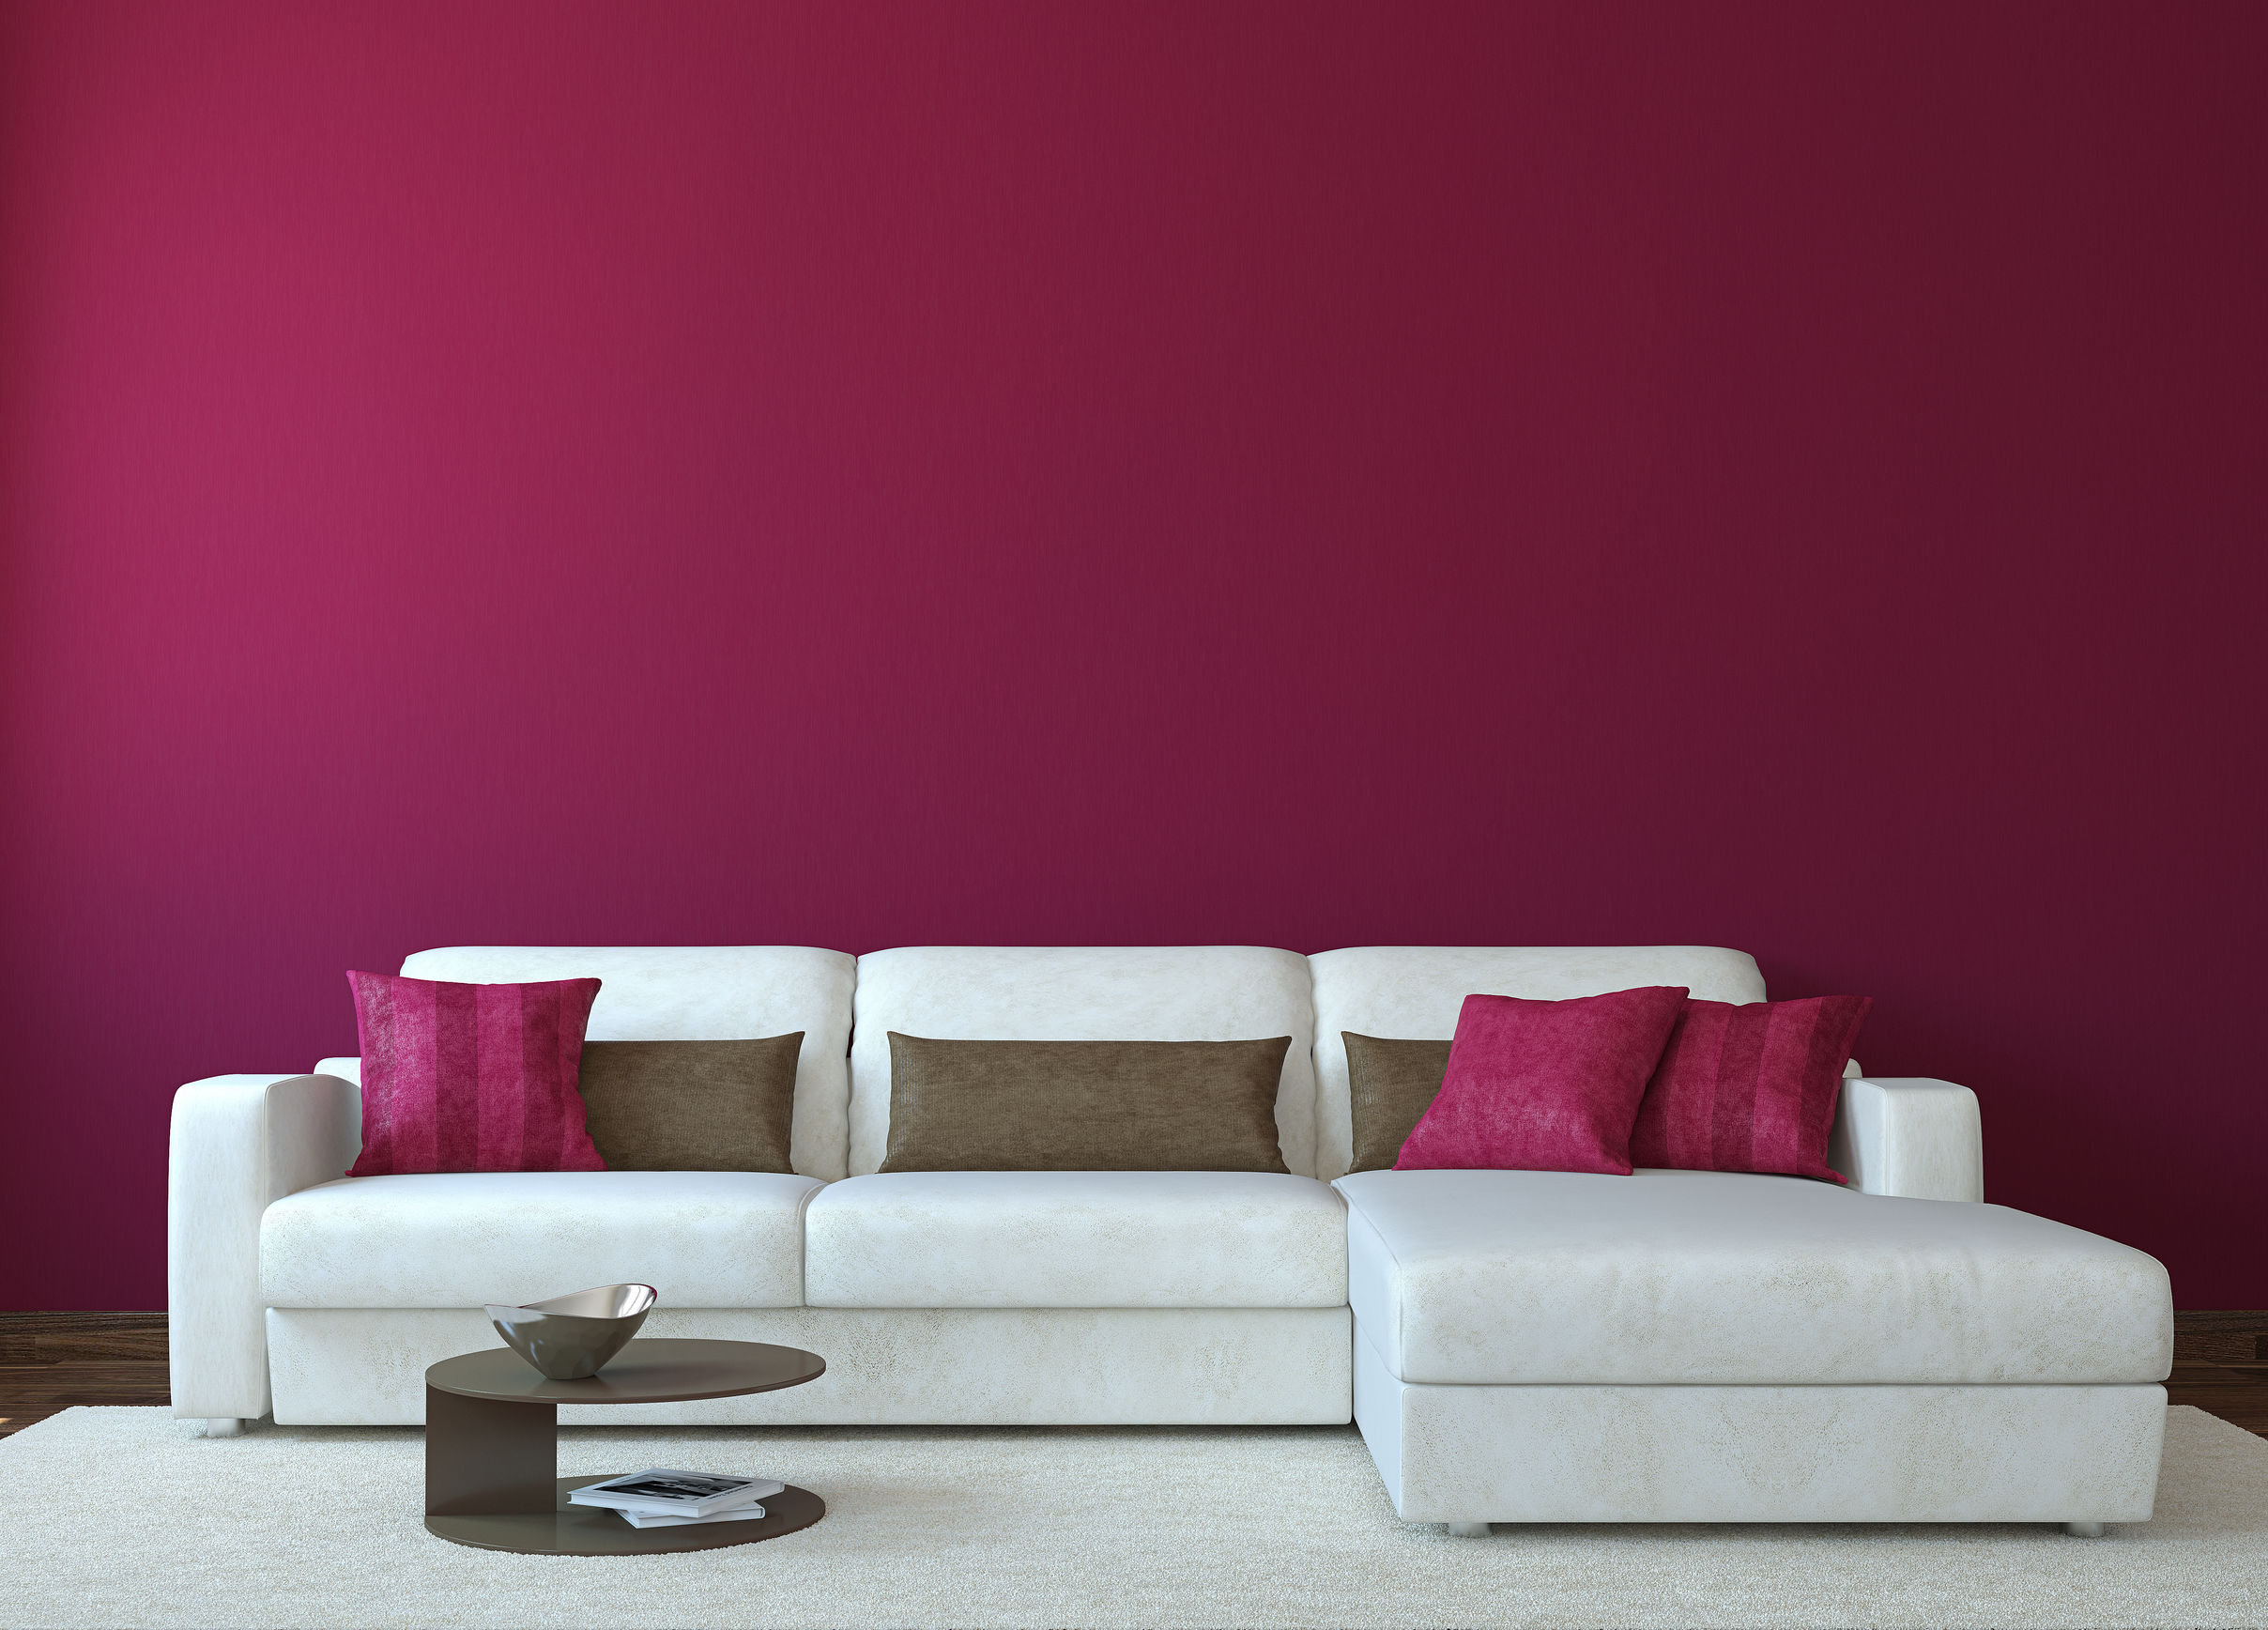 Generic Living Room with maroon wall and pillows